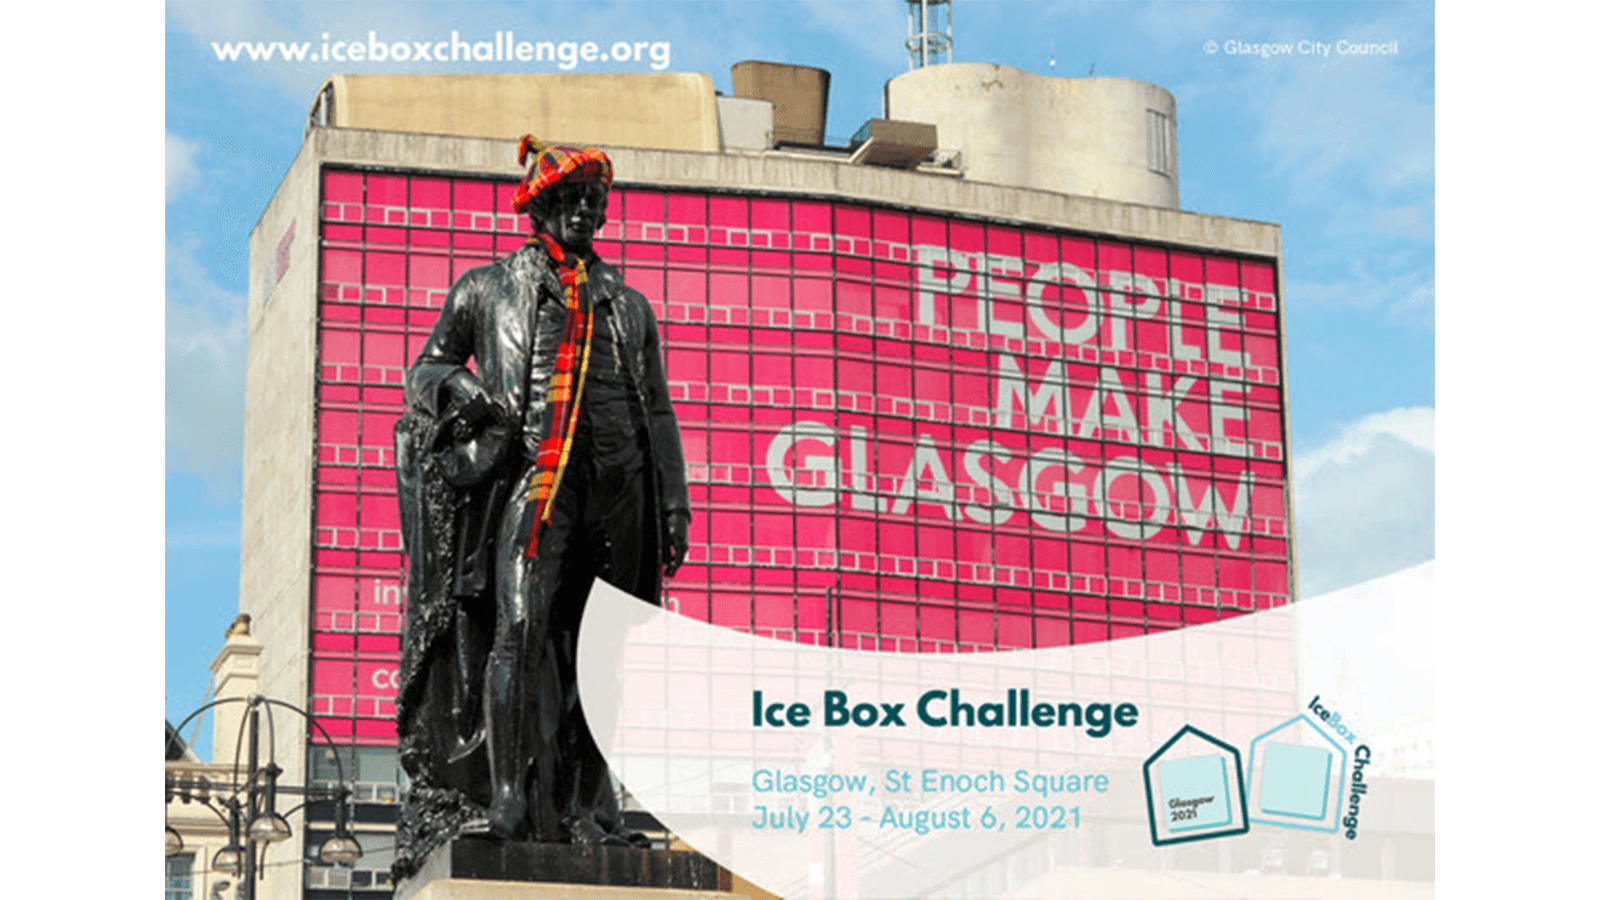 Ice Box Challenge Glasgow: St Enoch Square, July 23 - August 6, 2021